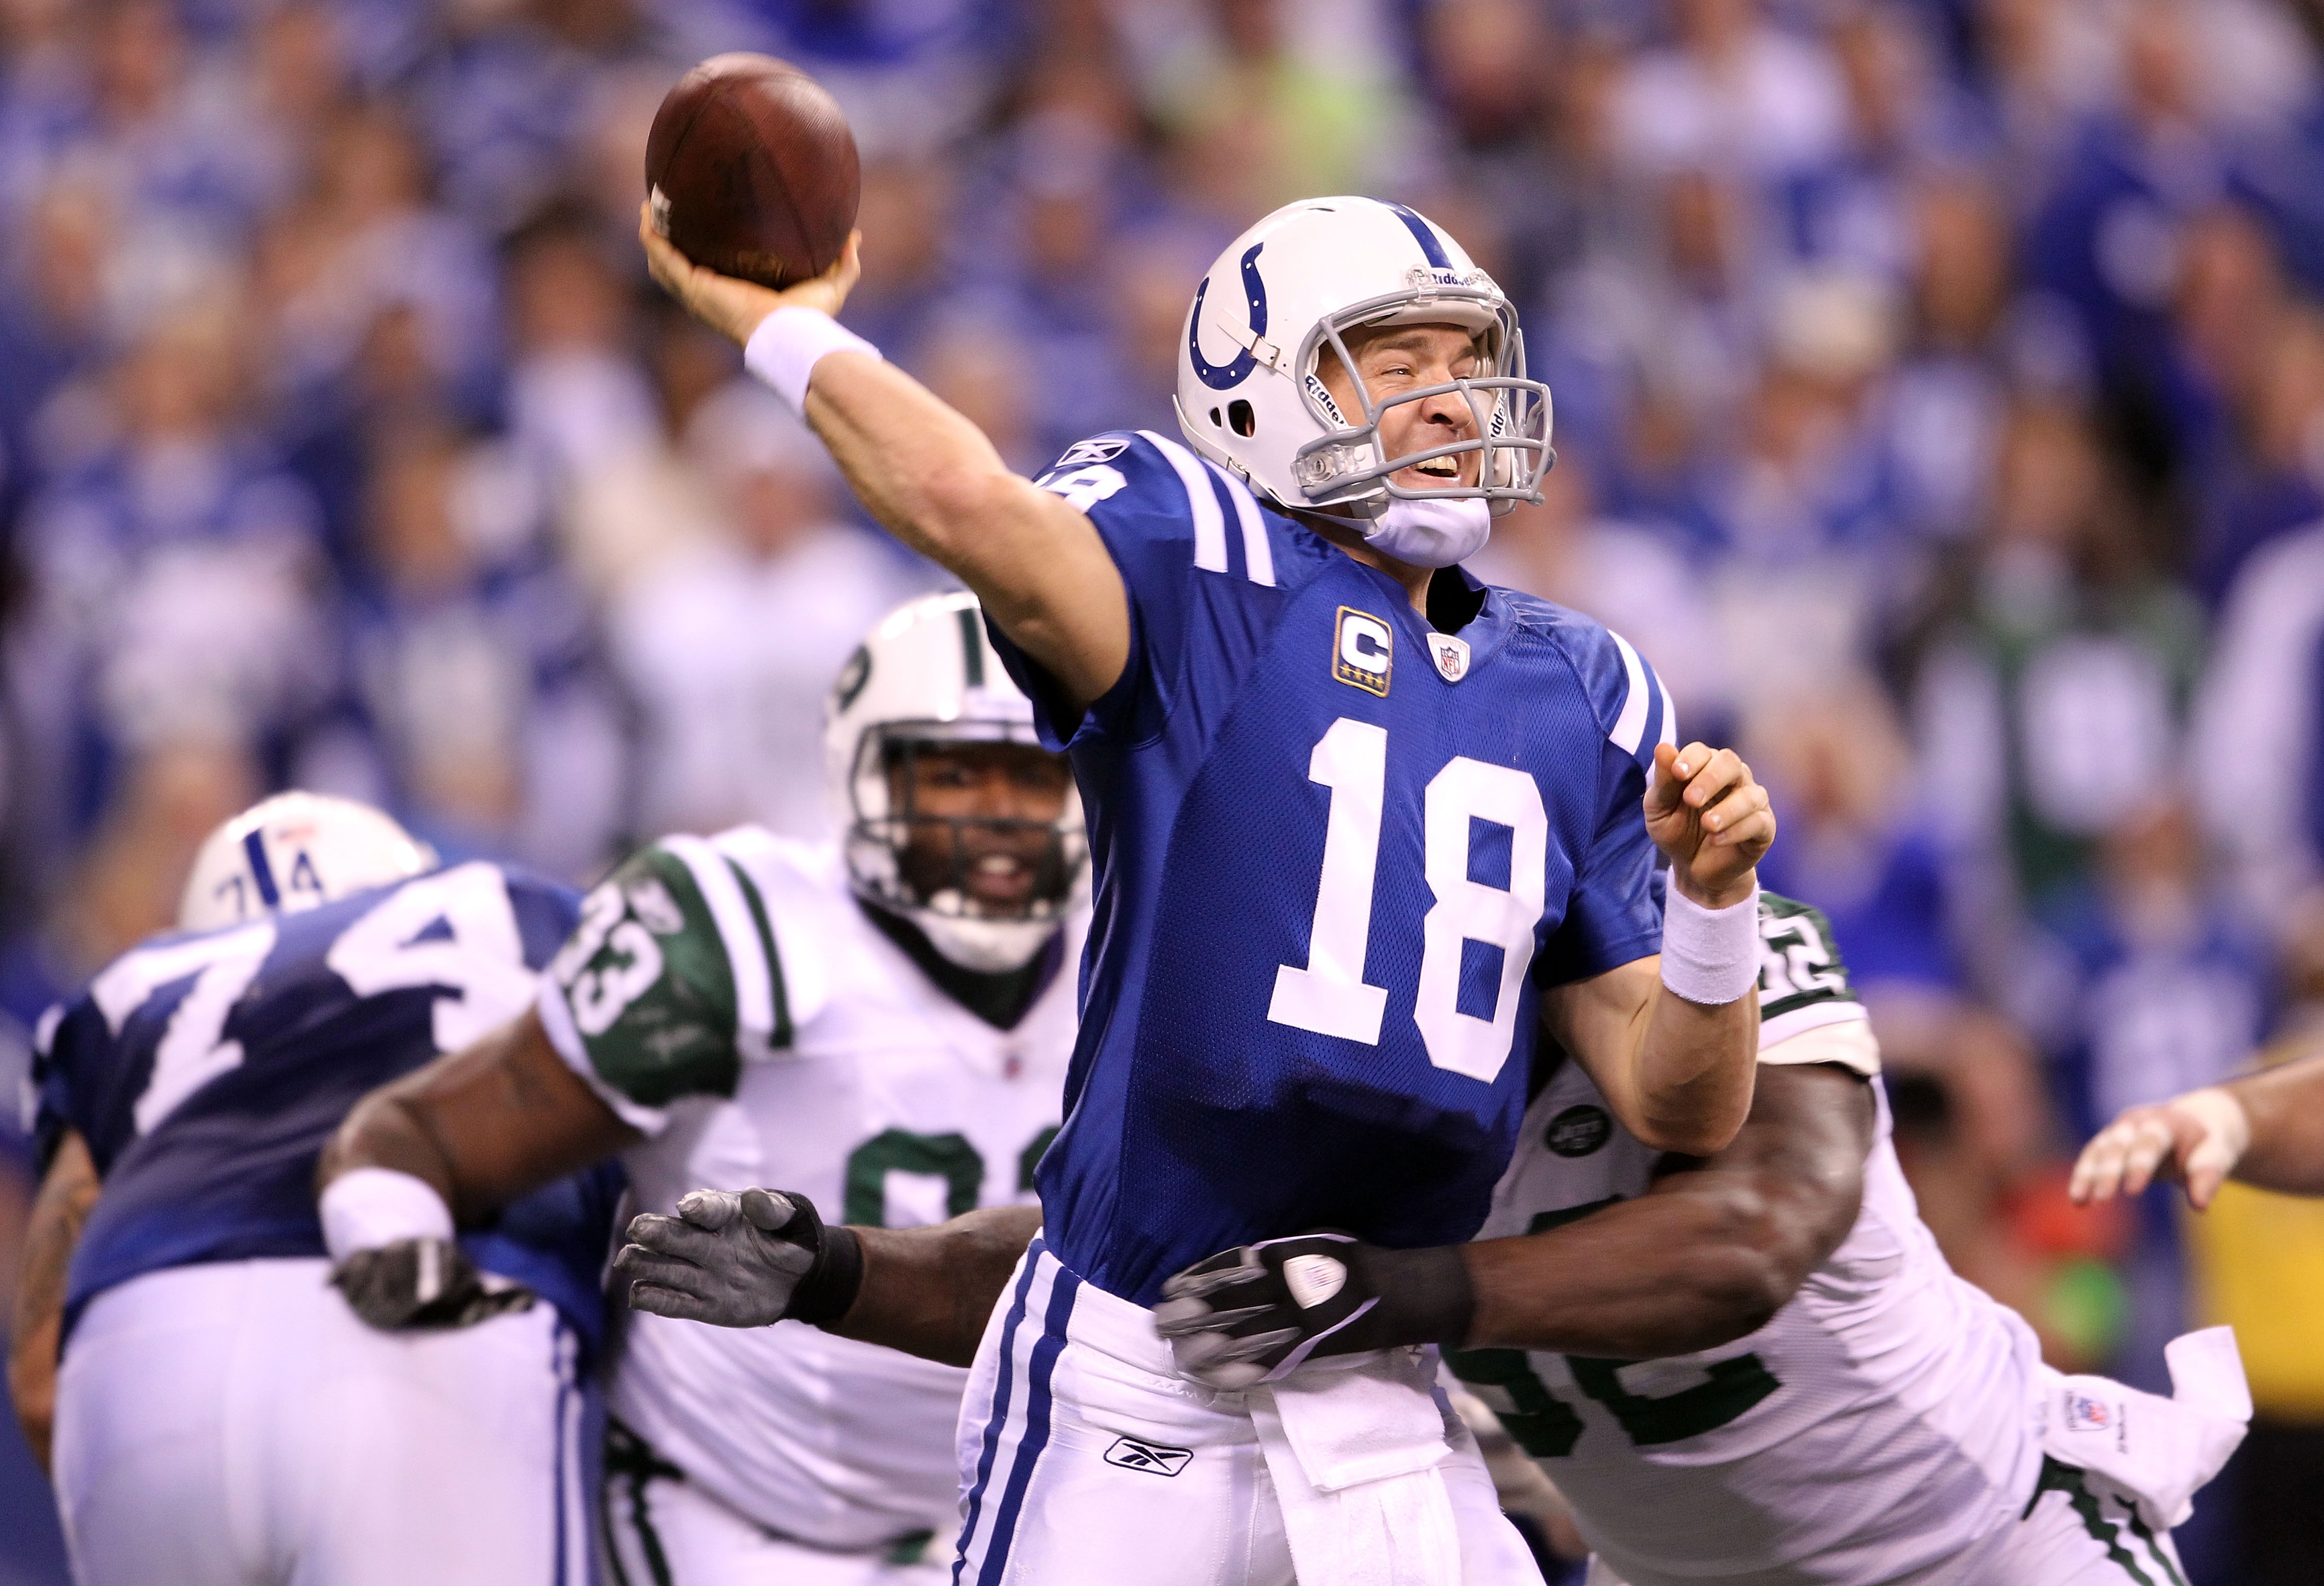 INDIANAPOLIS, IN - JANUARY 08:  Quarterback Peyton Manning #18 of the Indianapolis Colts throws a pss under pressure against the New York Jets during their 2011 AFC wild card playoff game at Lucas Oil Stadium on January 8, 2011 in Indianapolis, Indiana. T